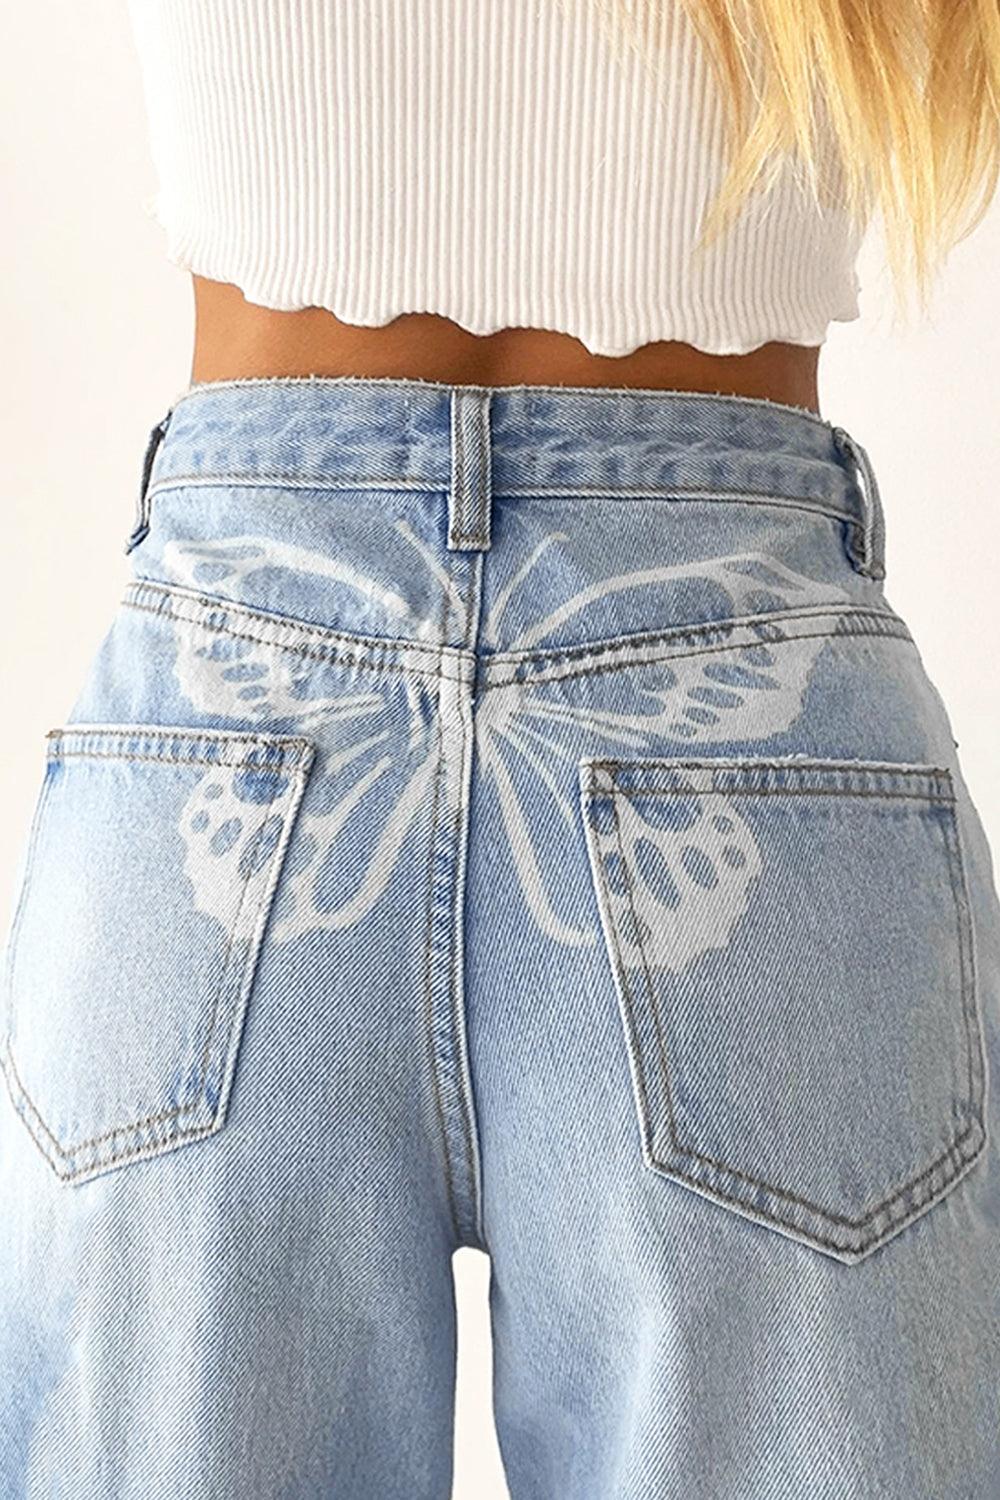 White Butterfly Straight Light Blue Jeans - Aesthetic Clothes Shop